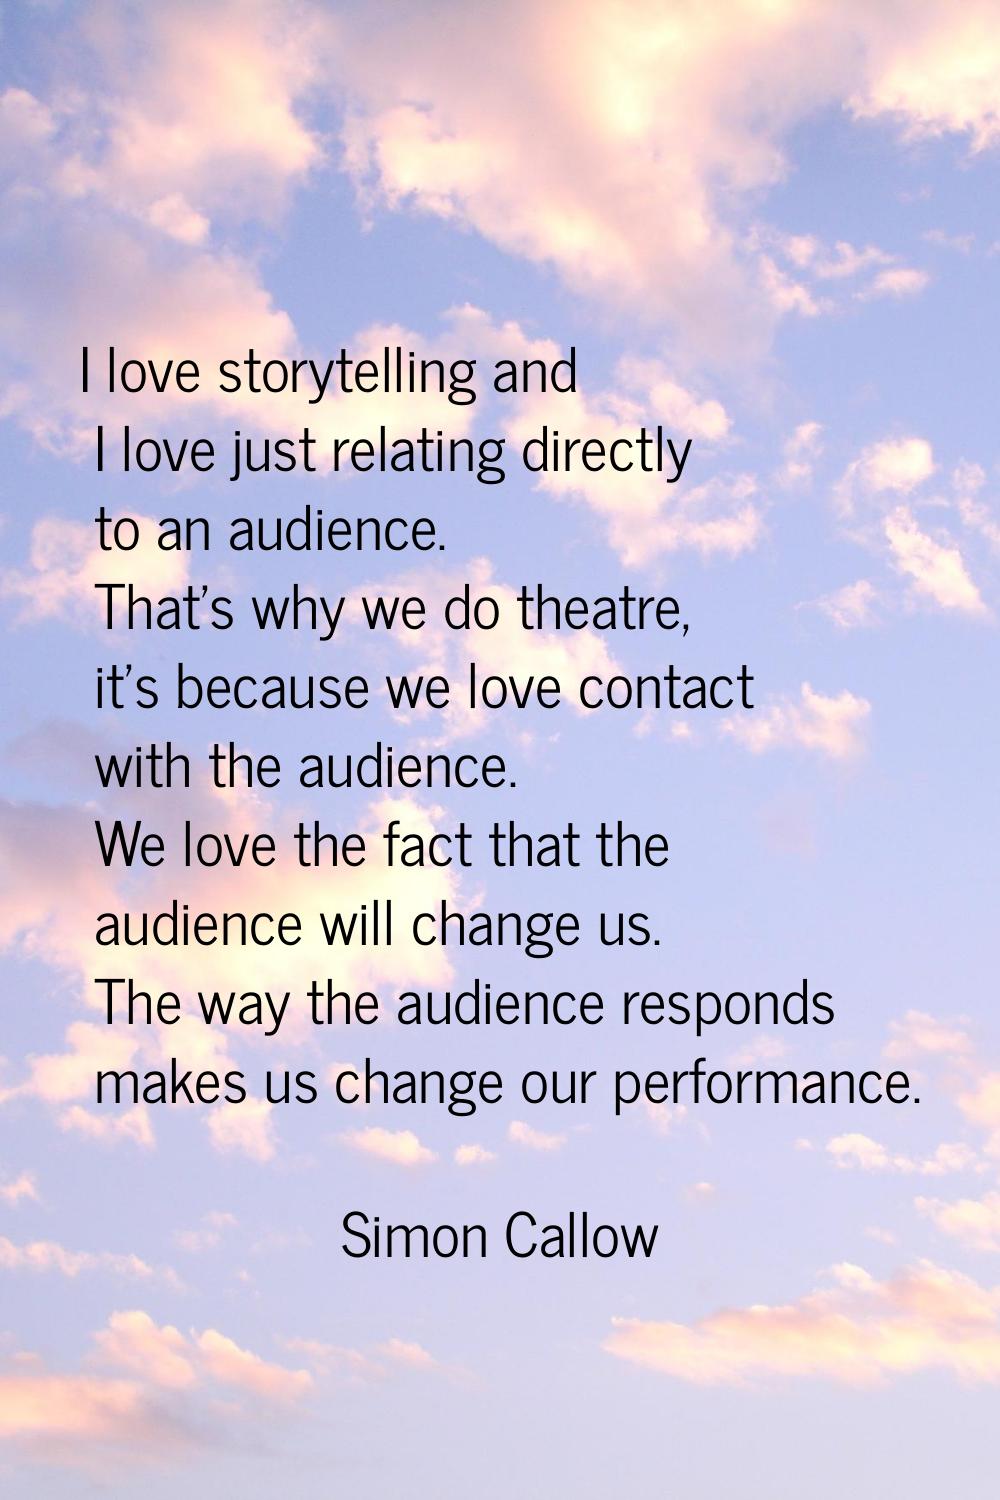 I love storytelling and I love just relating directly to an audience. That's why we do theatre, it'